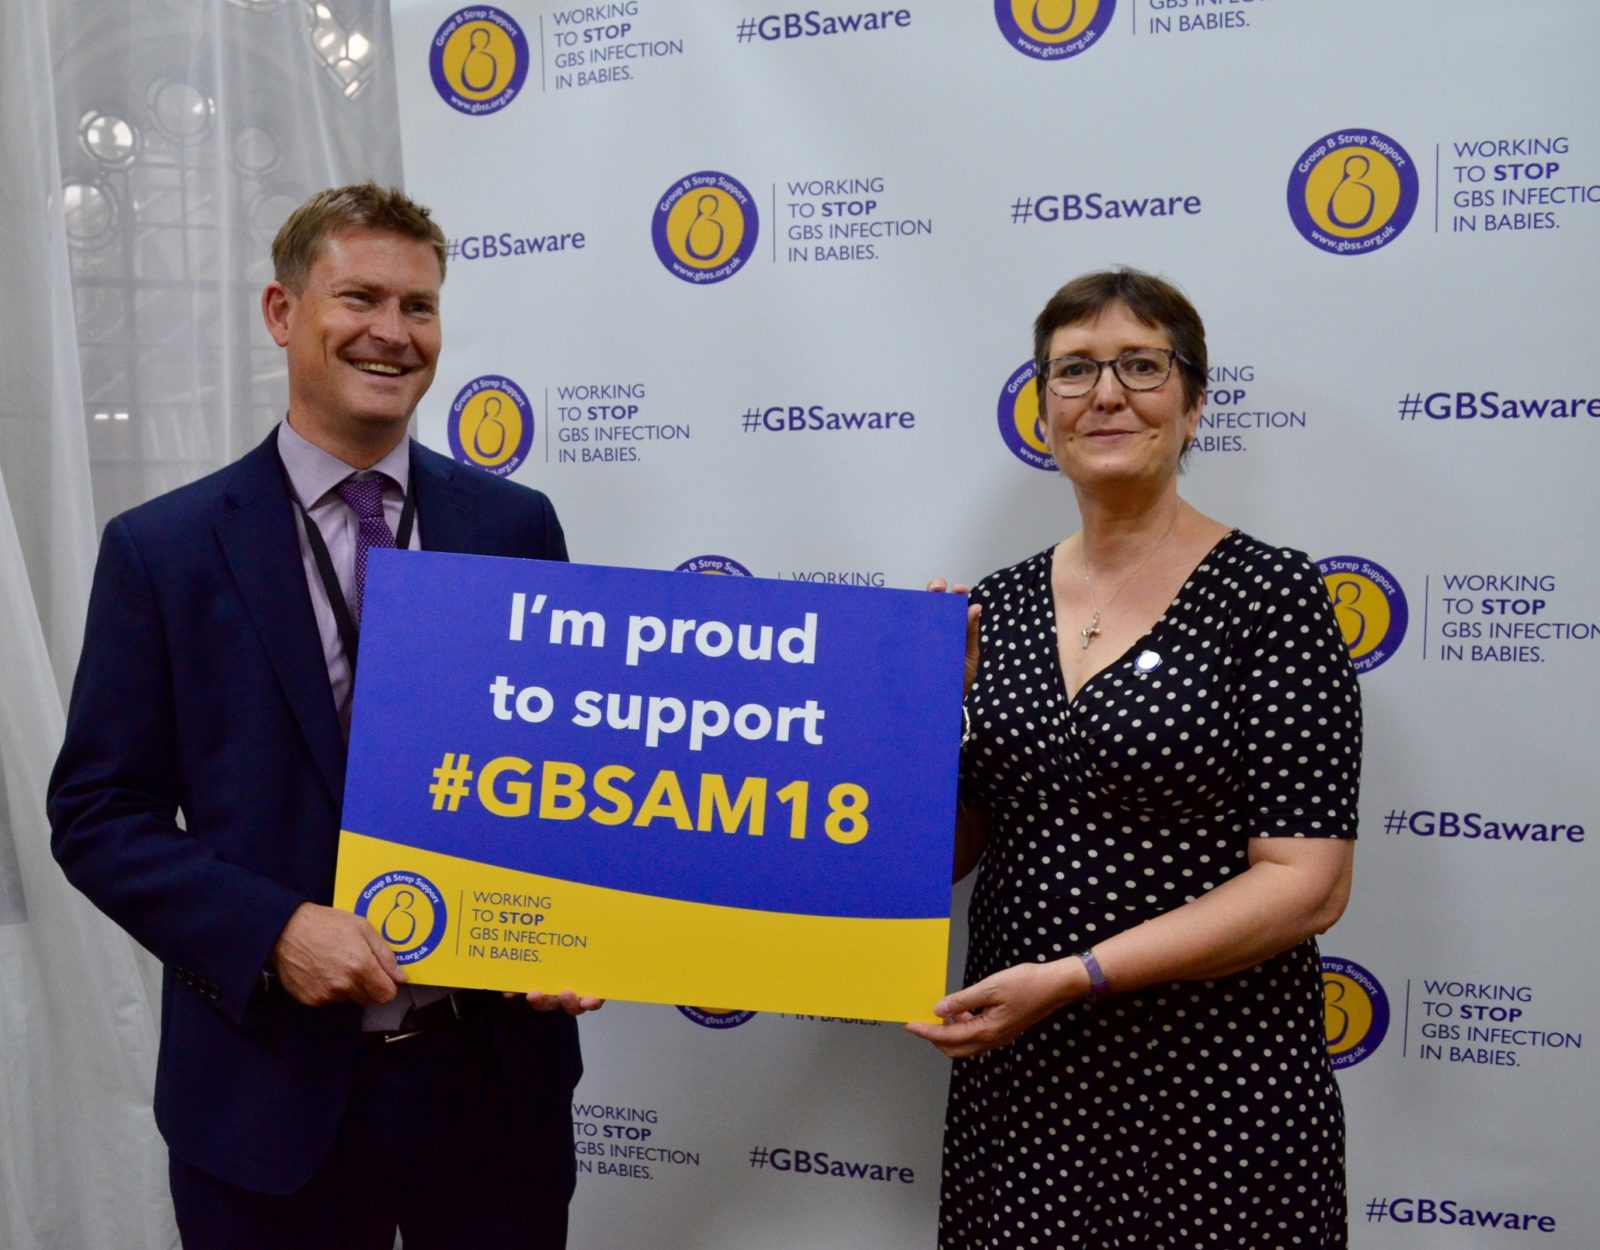 Justin is proud to support #GBSAM18